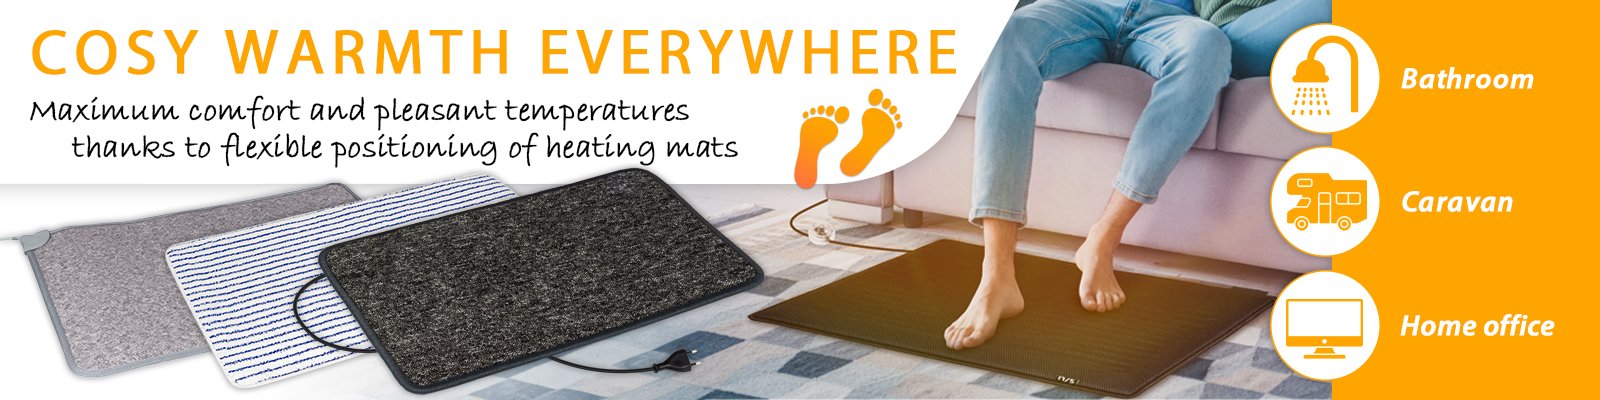 Heated carpets - Simply lay them out and enjoy the warmth on your feet